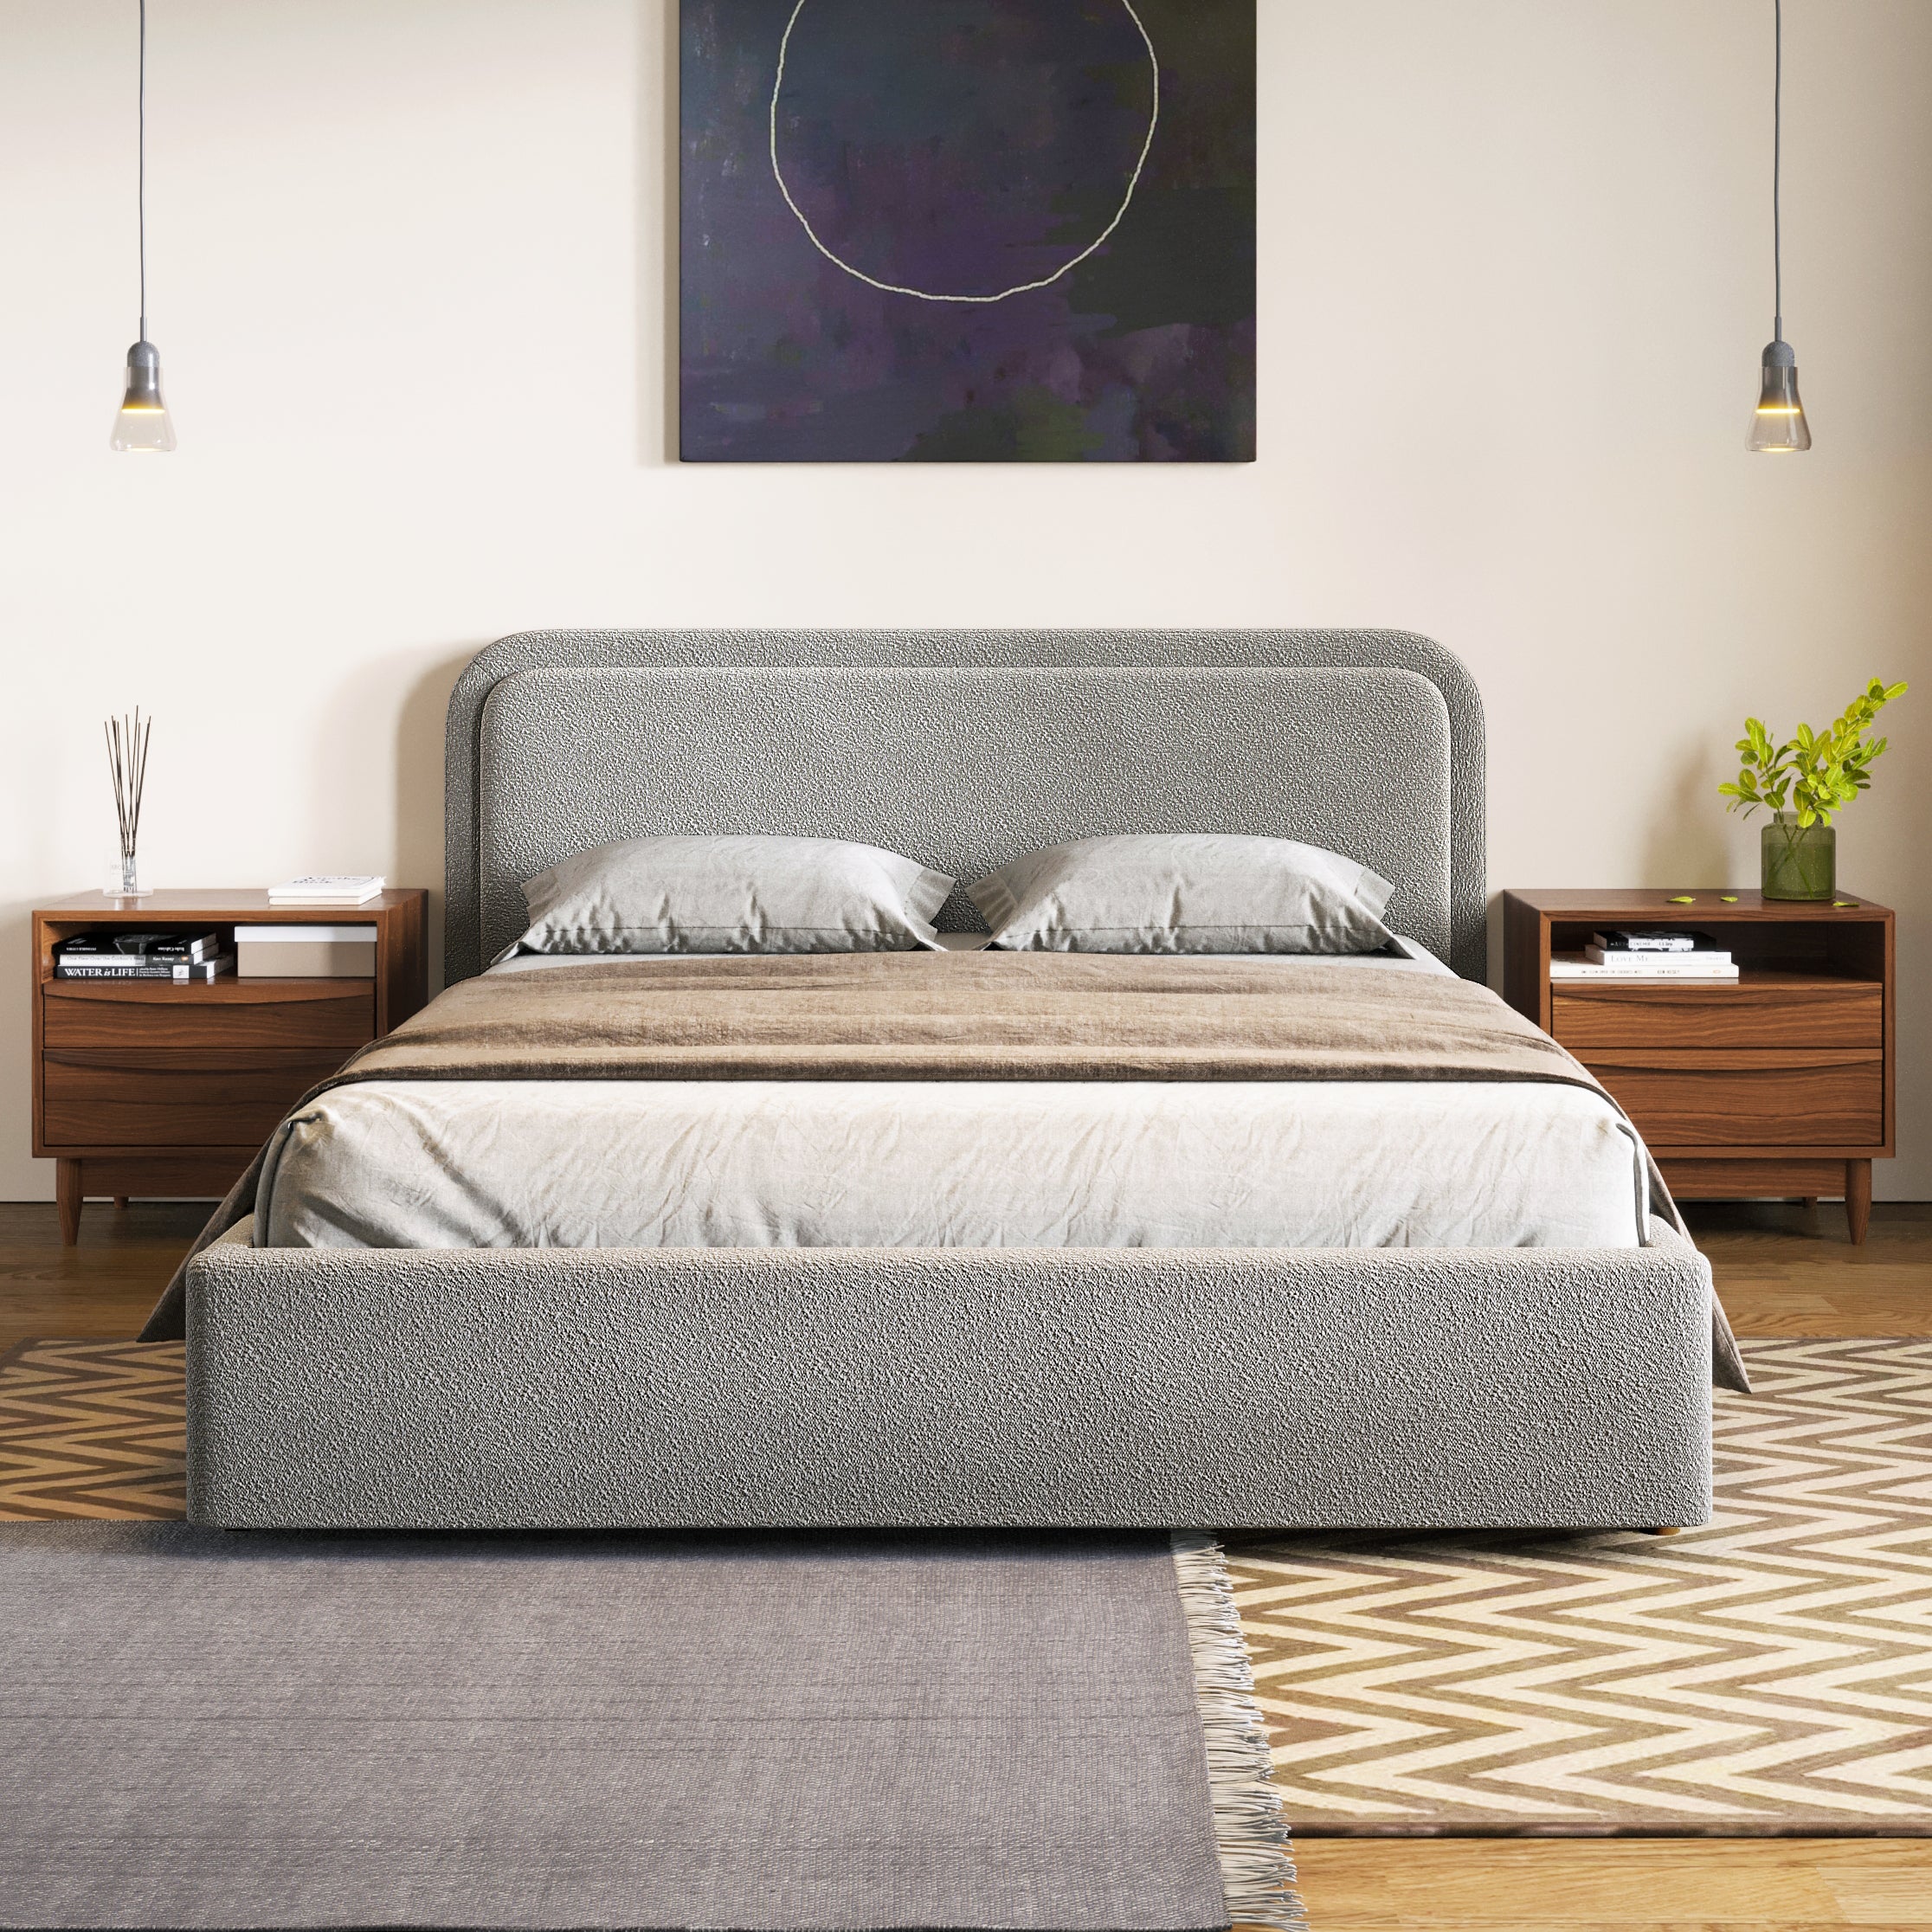 Chloe Upholstered Platform Queen Bed, Gray Boucle Fabric